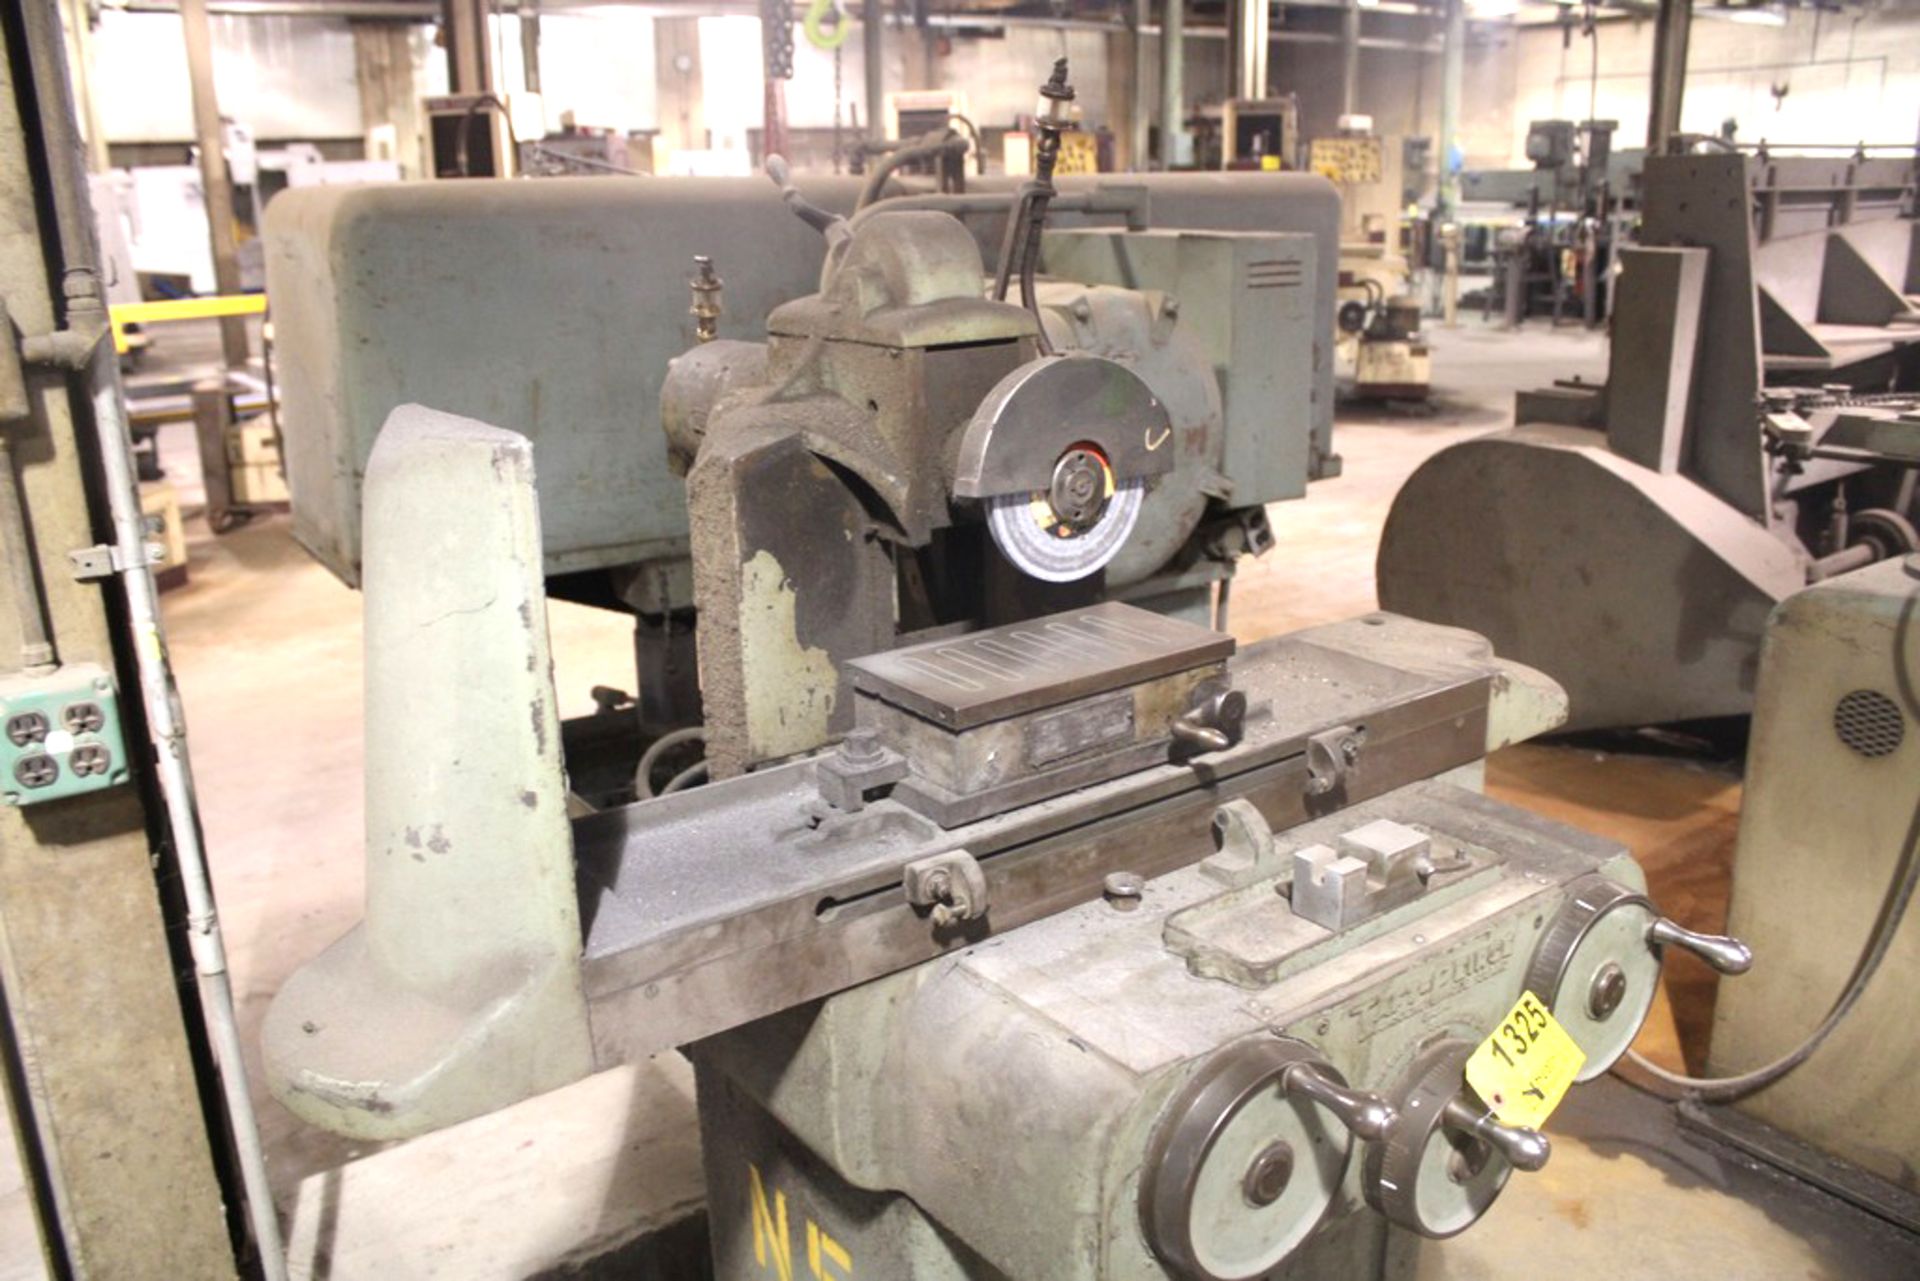 TAFT PEIRCE 6”X12” SURFACE GRINDER S/N 680, WITH TILT GRINDING HEAD, PERMANENT MAGNETIC CHUCK - Image 4 of 4